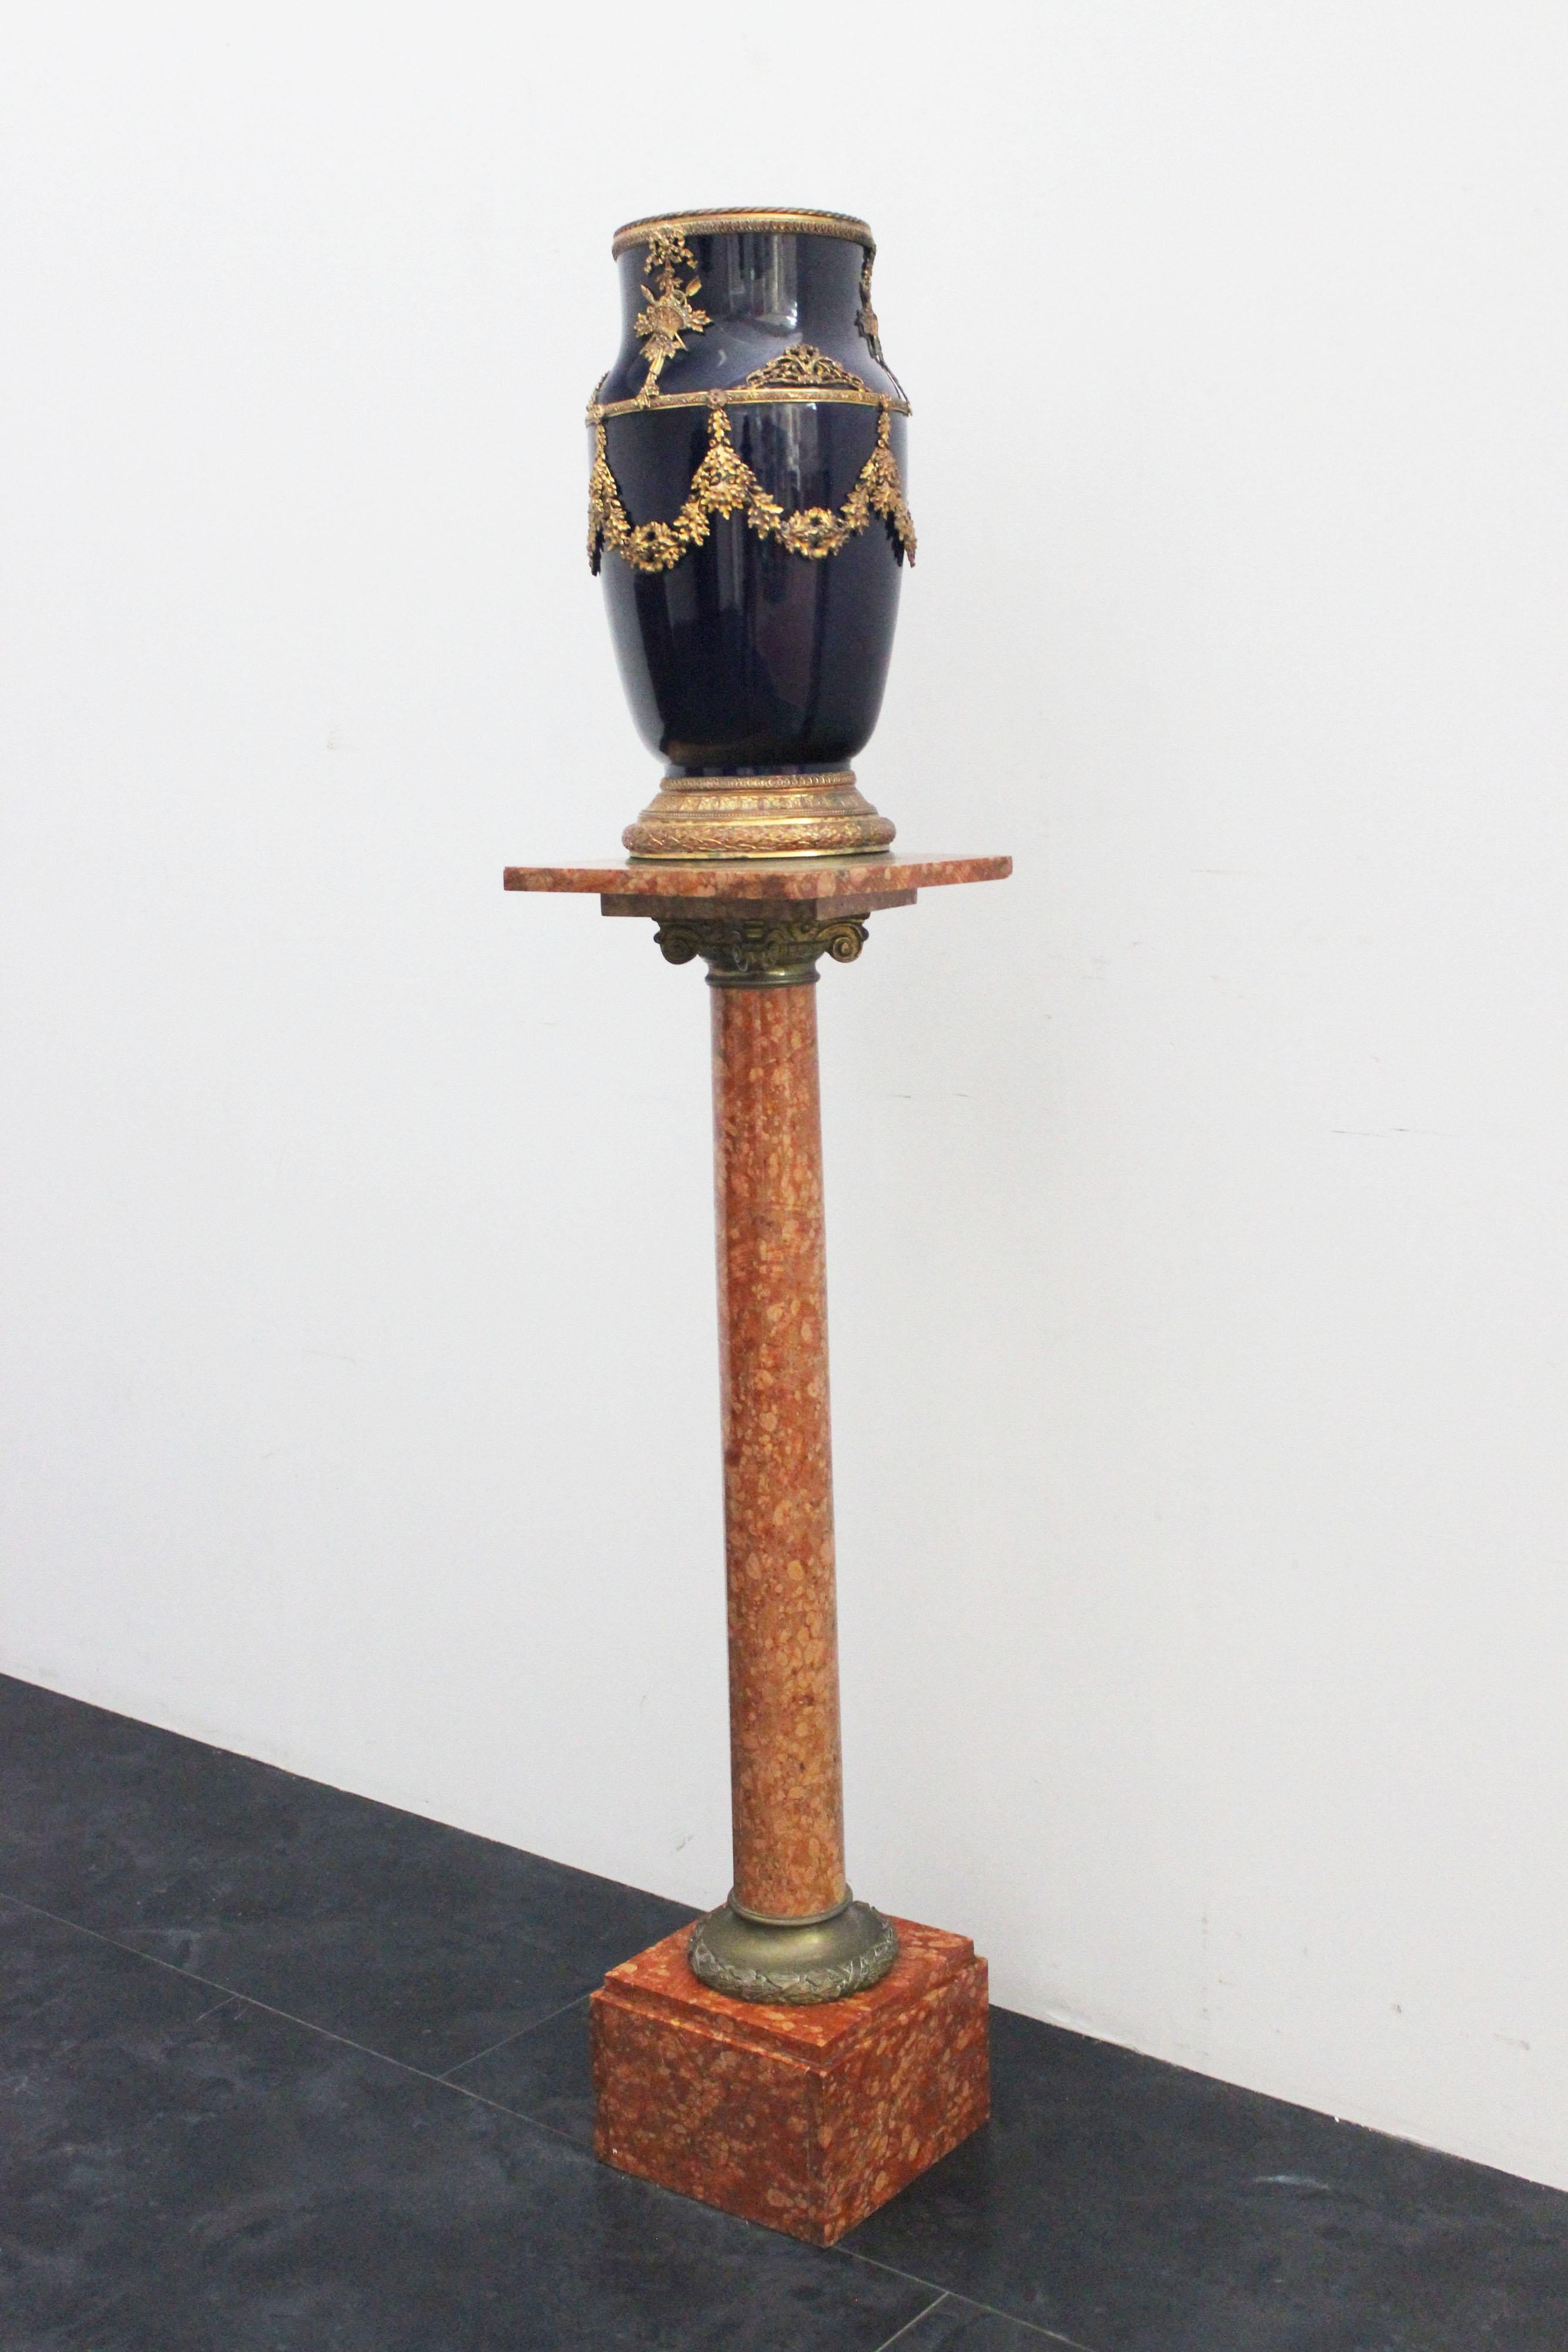 Blue vase on red marble column in Napoleon III style, early 20th century.
Splendid cobalt blue vase with gilt bronze details housed interlockingly on French red marble and gilt bronze column in Napoleon III style. Vase h48 x diameter 23 cm, column